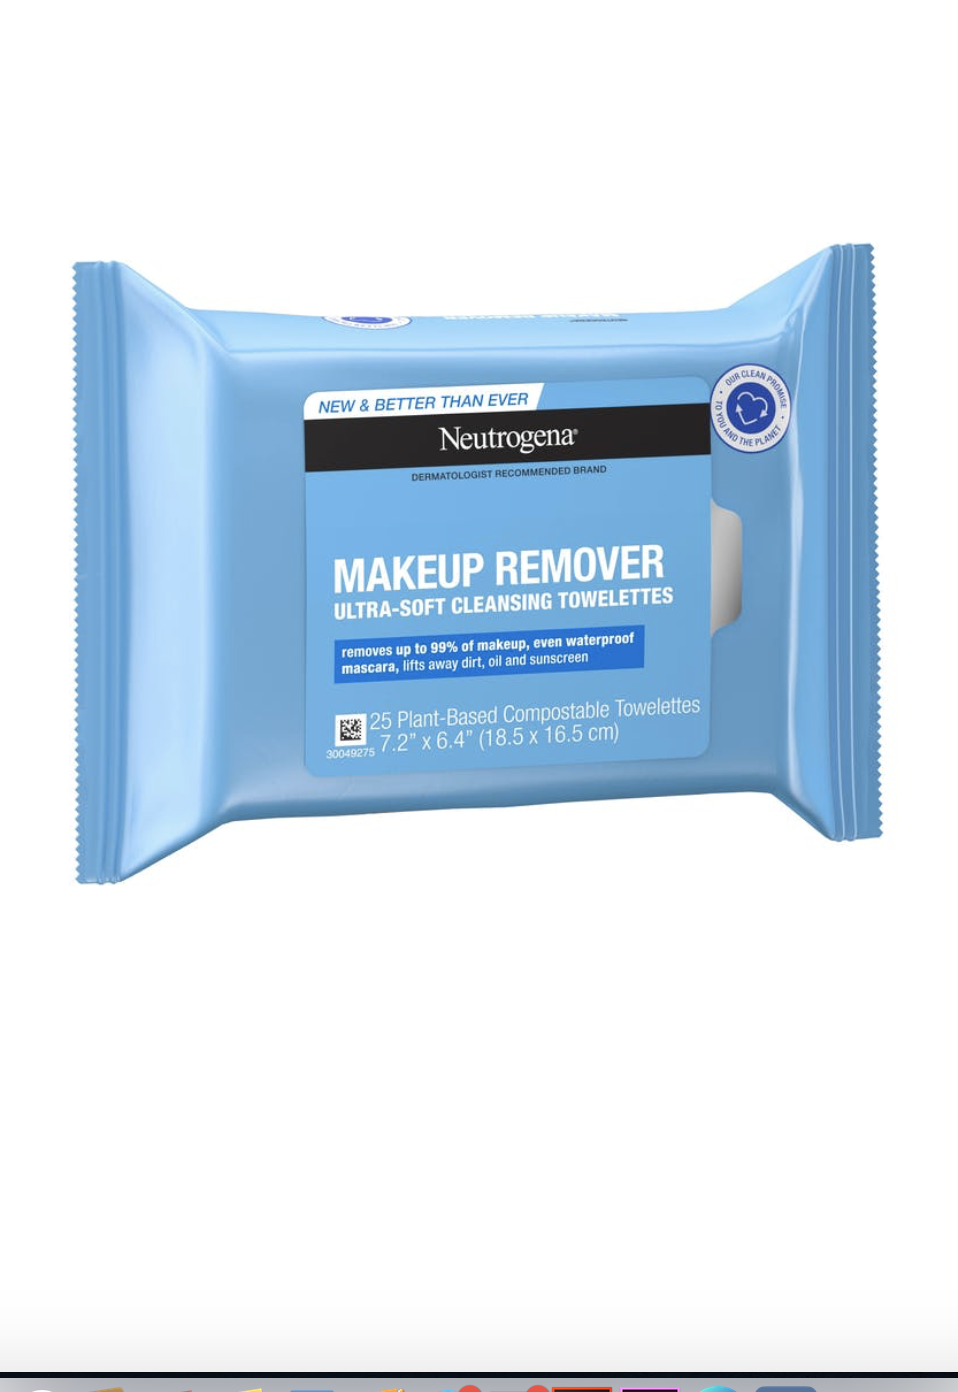 Makeup Remover Facial Cleansing Towelettes